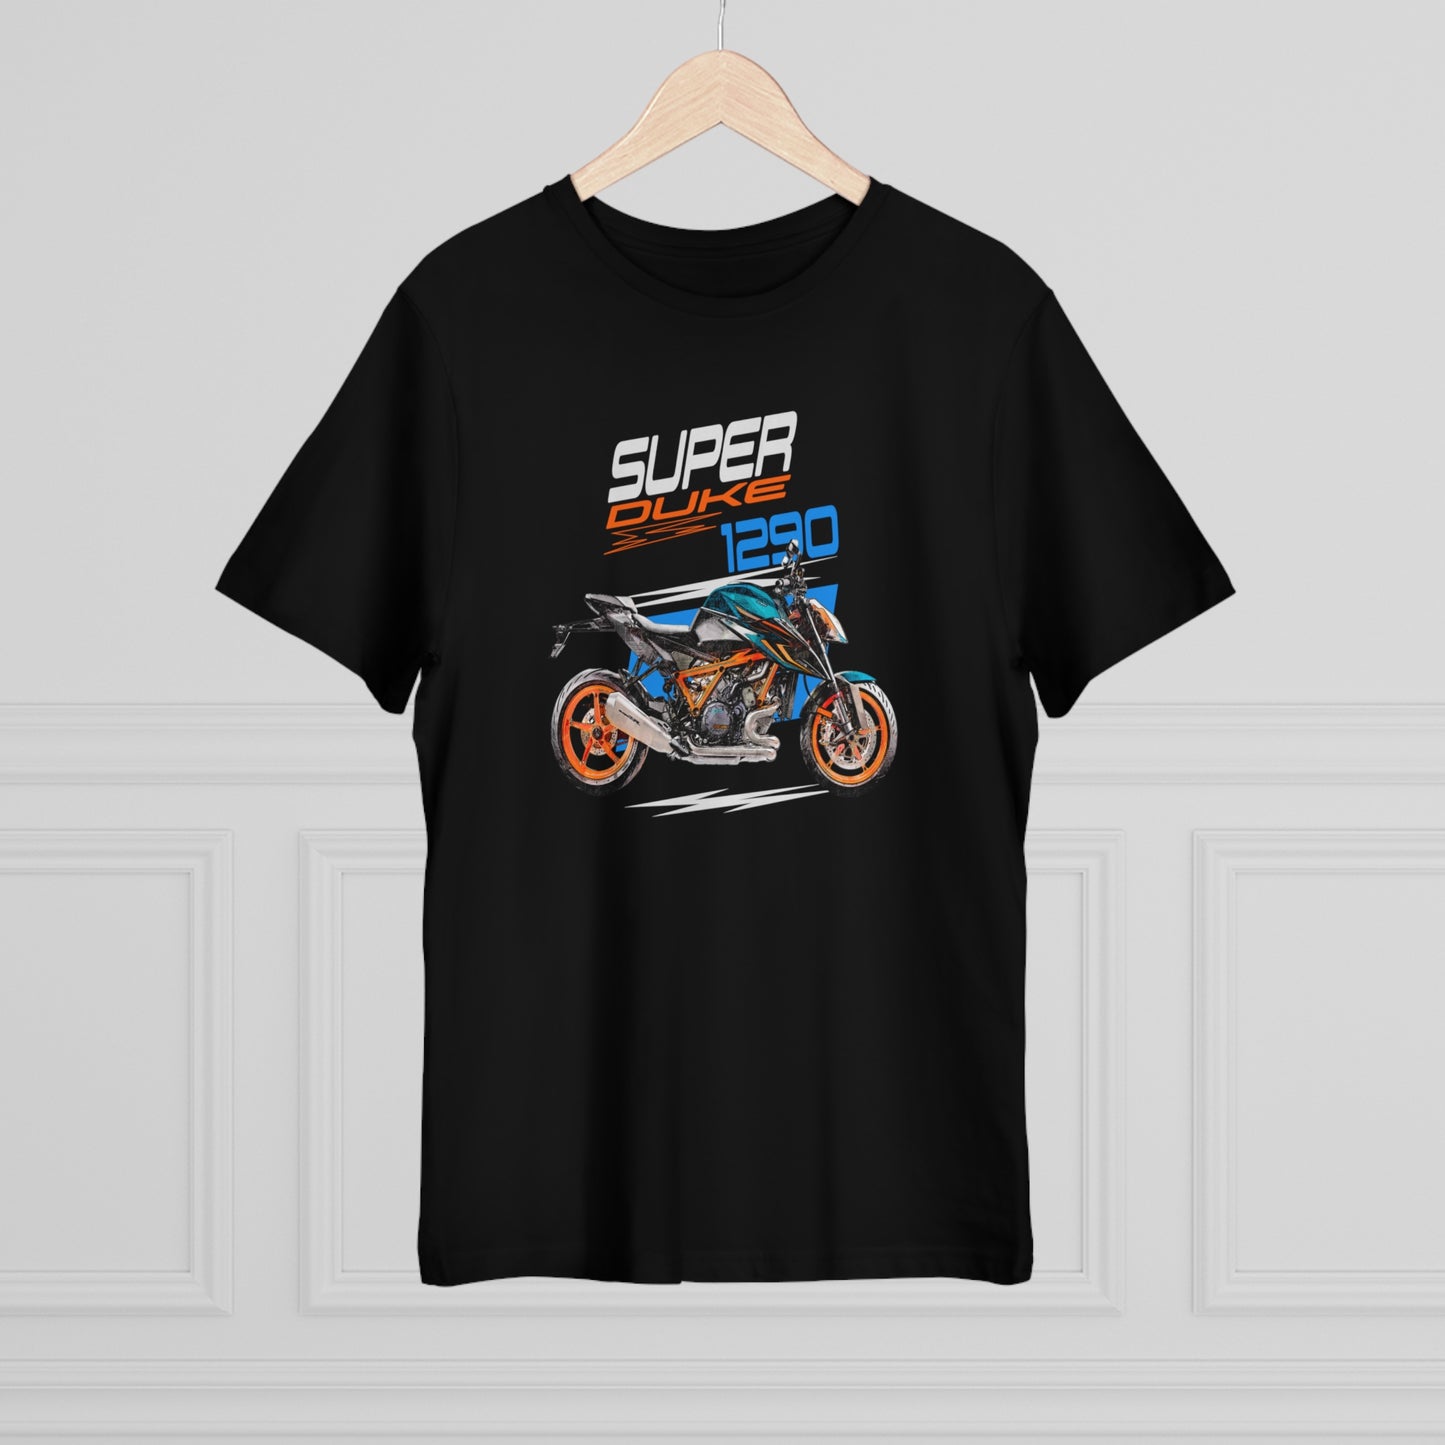 Draw My Motorcycle T-Shirt | Personalized Shirt | Motorcycle Tee - Gift for Riders